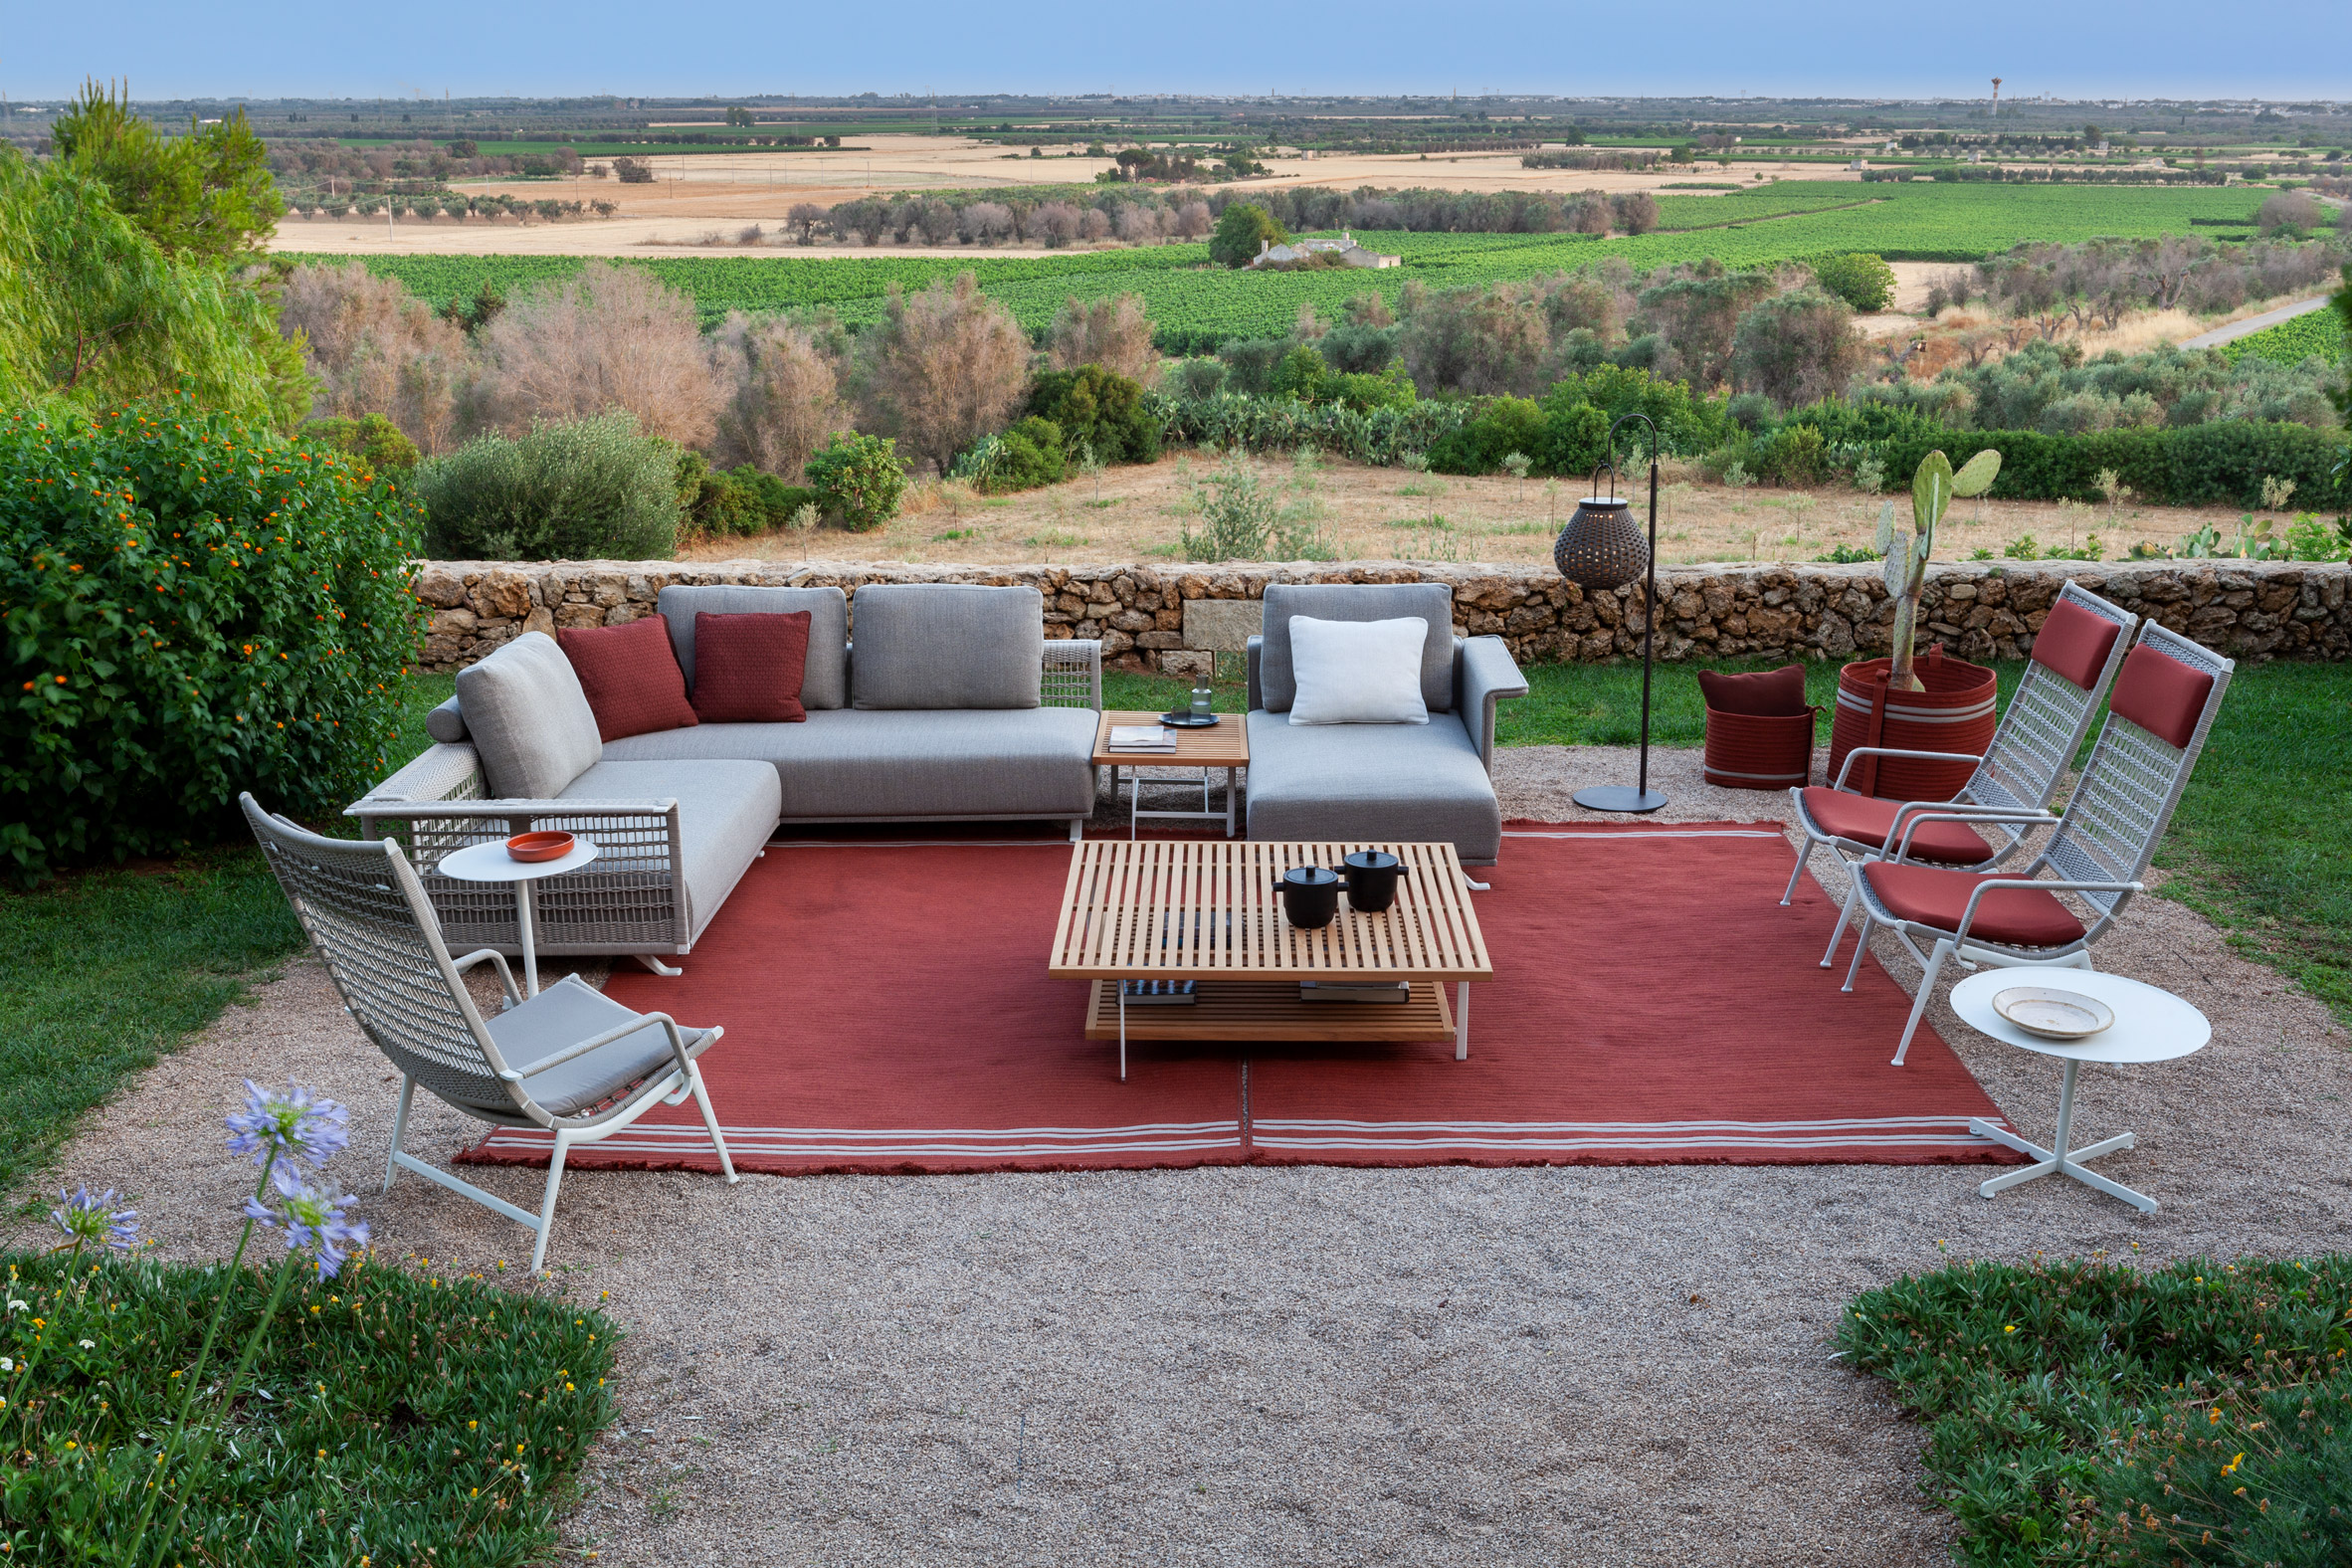 Poltrona Frau's Solaria sofa and armchairs in the countryside